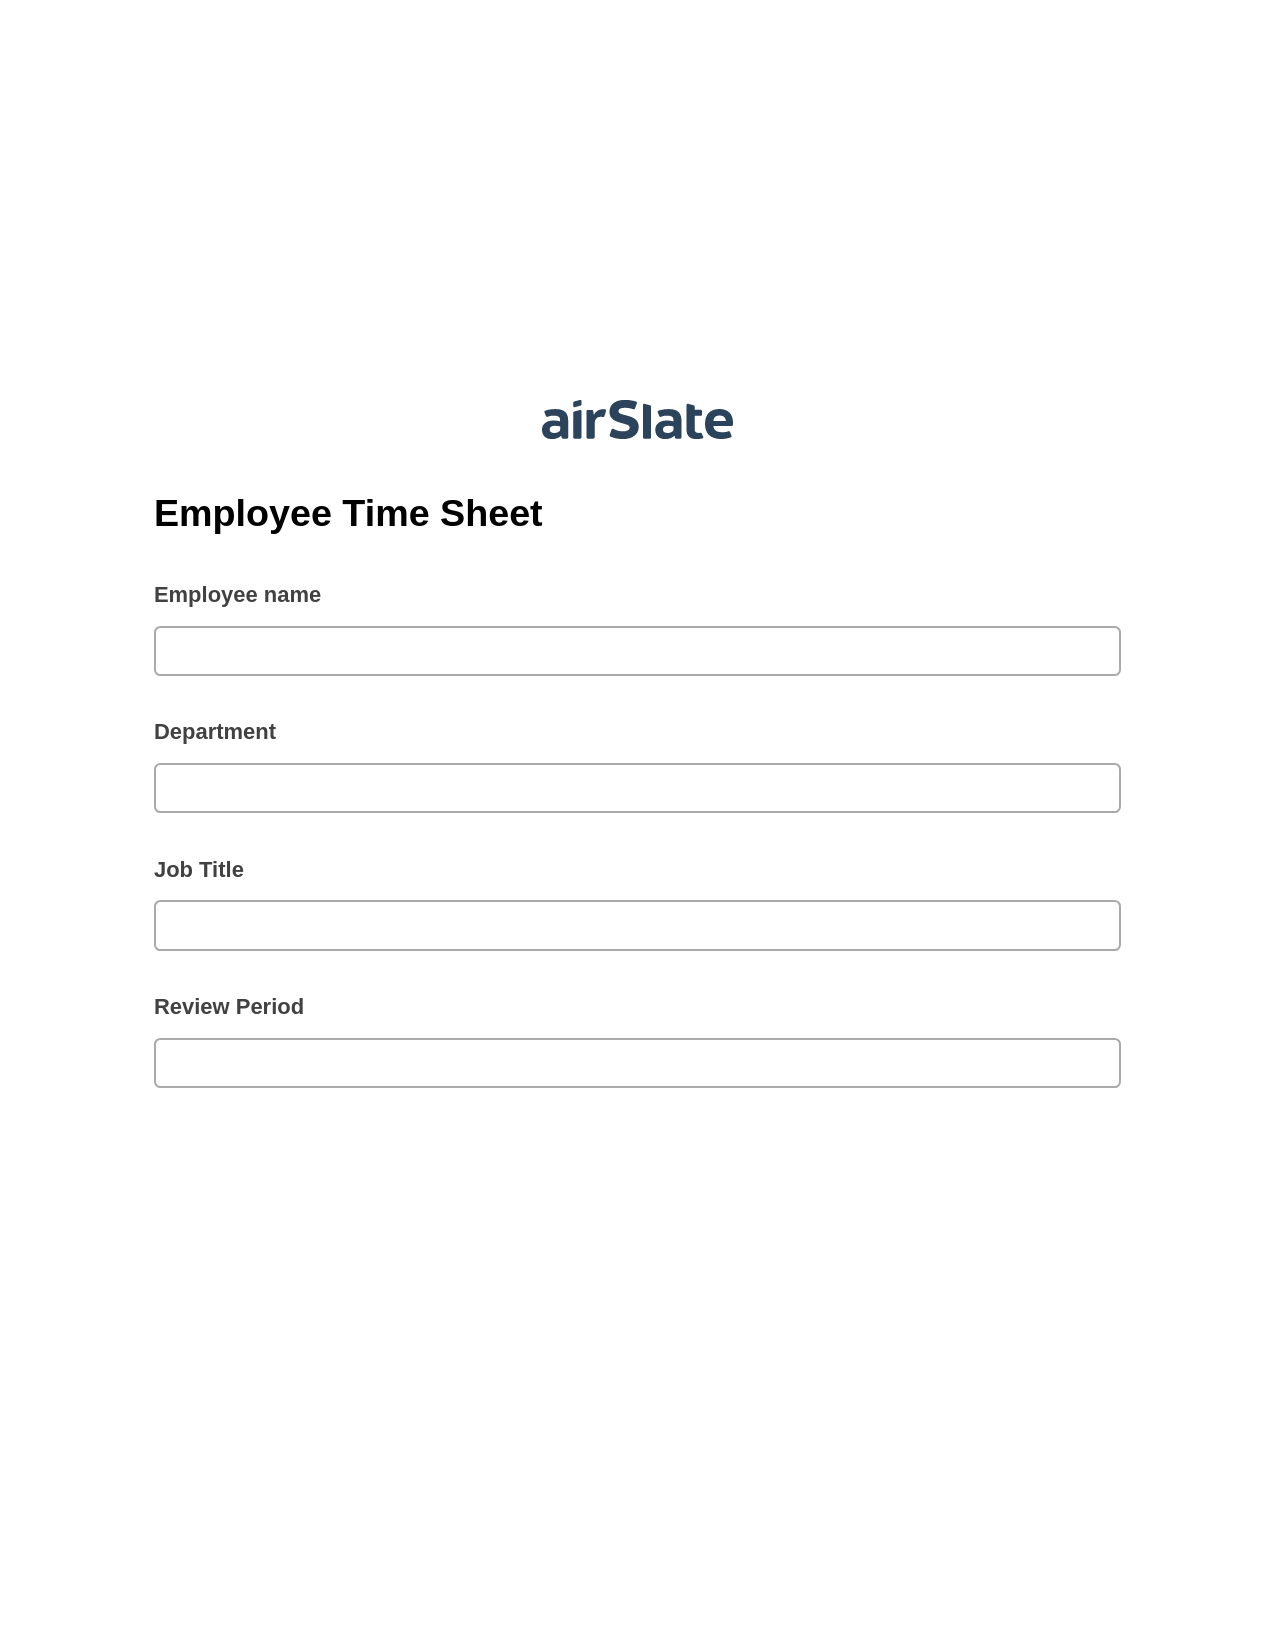 Multirole Employee Time Sheet Pre-fill from another Slate Bot, Update NetSuite Record Bot, Post-finish Document Bot